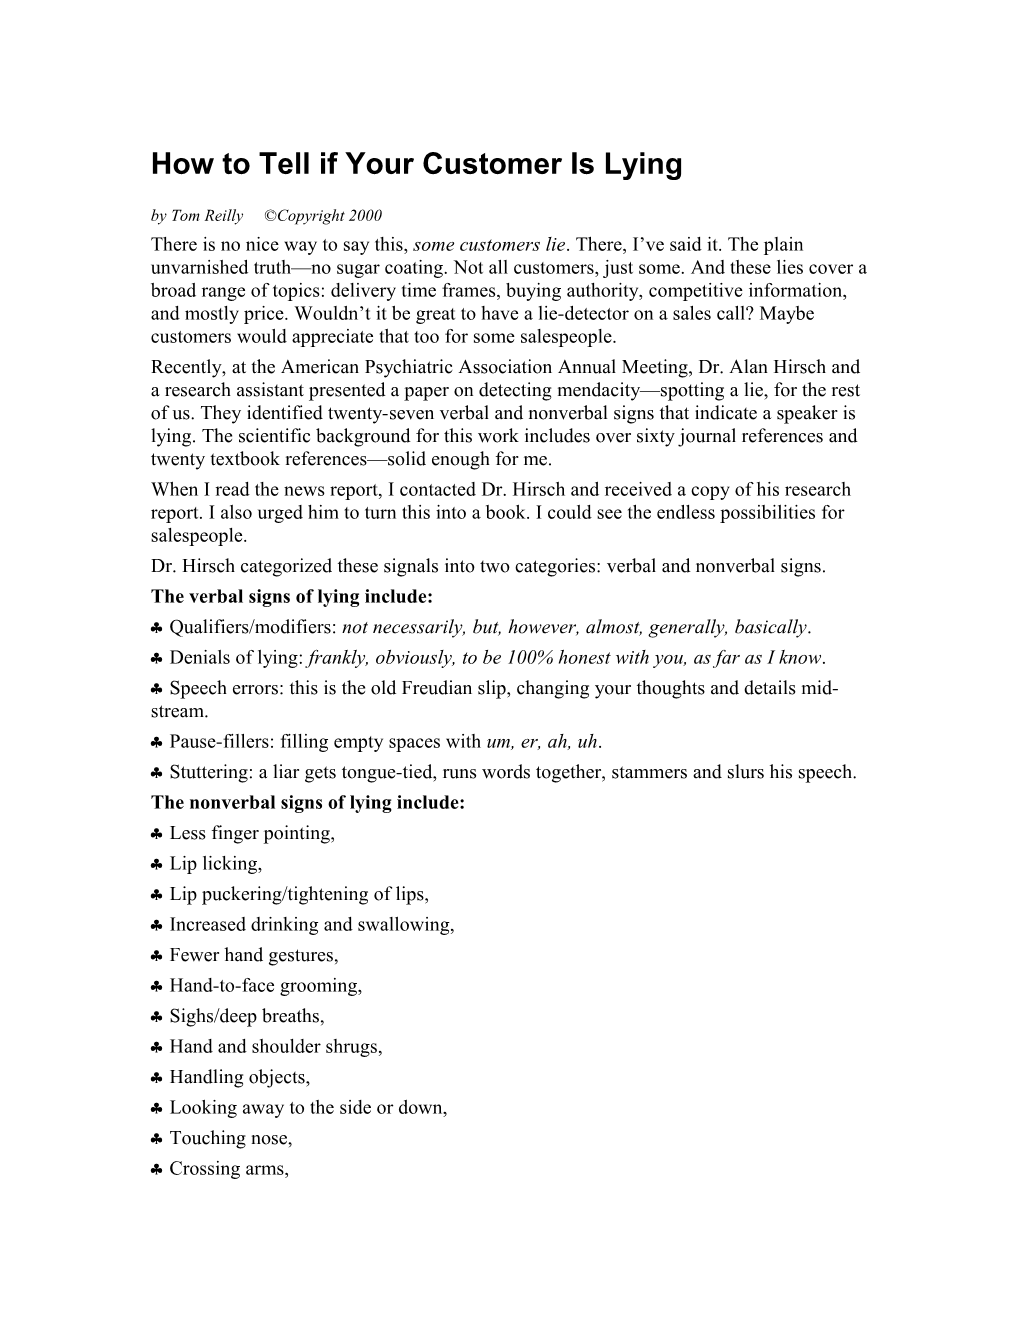 How to Tell If Your Customer Is Lying